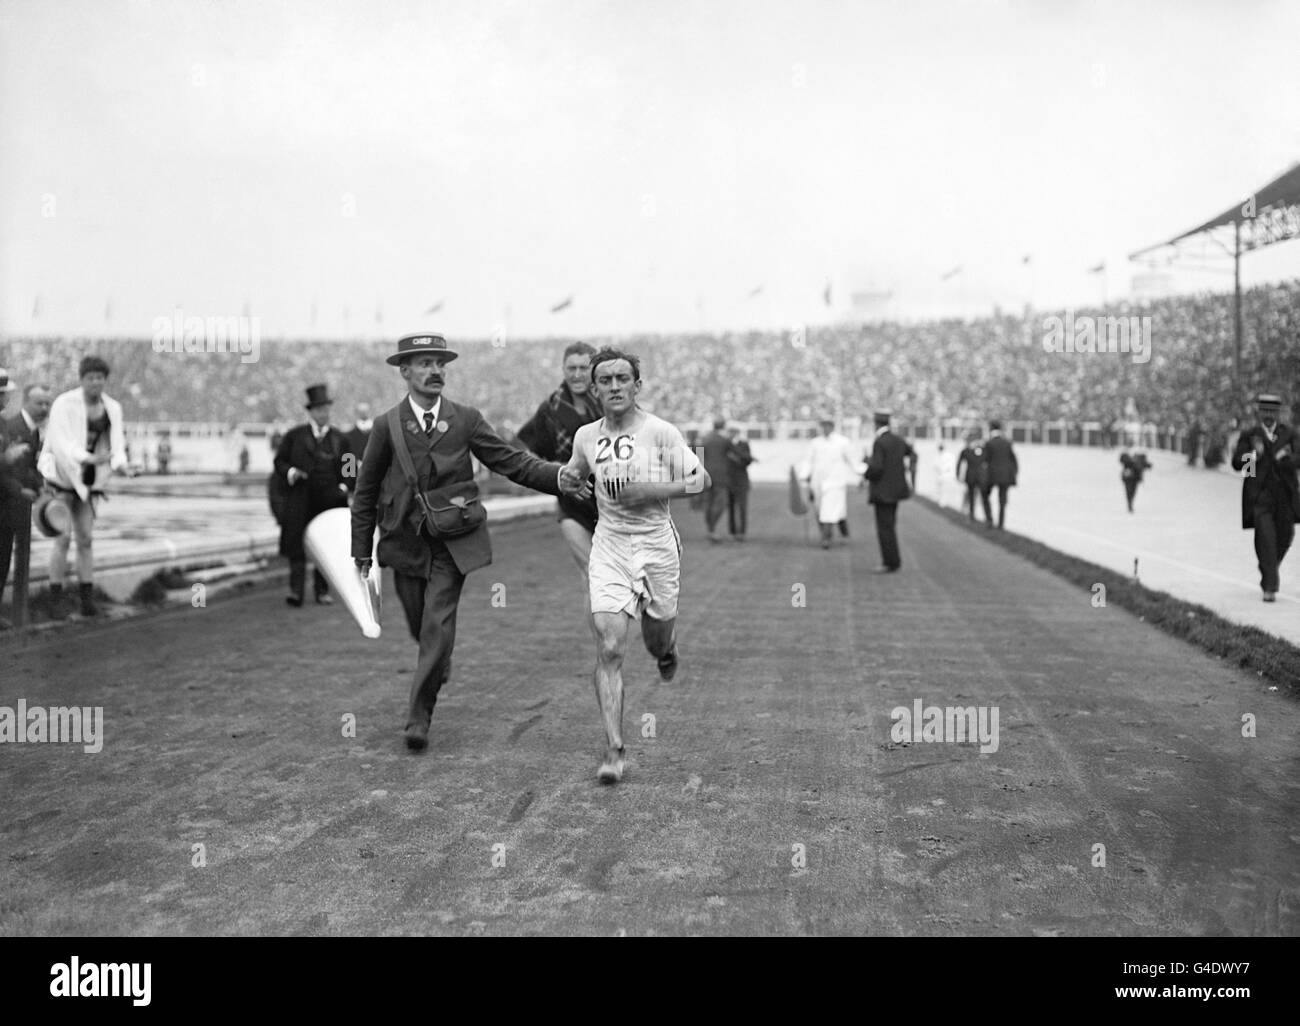 April 6th: On this day in 1896, the first modern Olympics began in Athens. Pictured here is the American athlete Johnny Hayes, who is competing in the marathon race at the 1908 Summer Olympics in London. Stock Photo